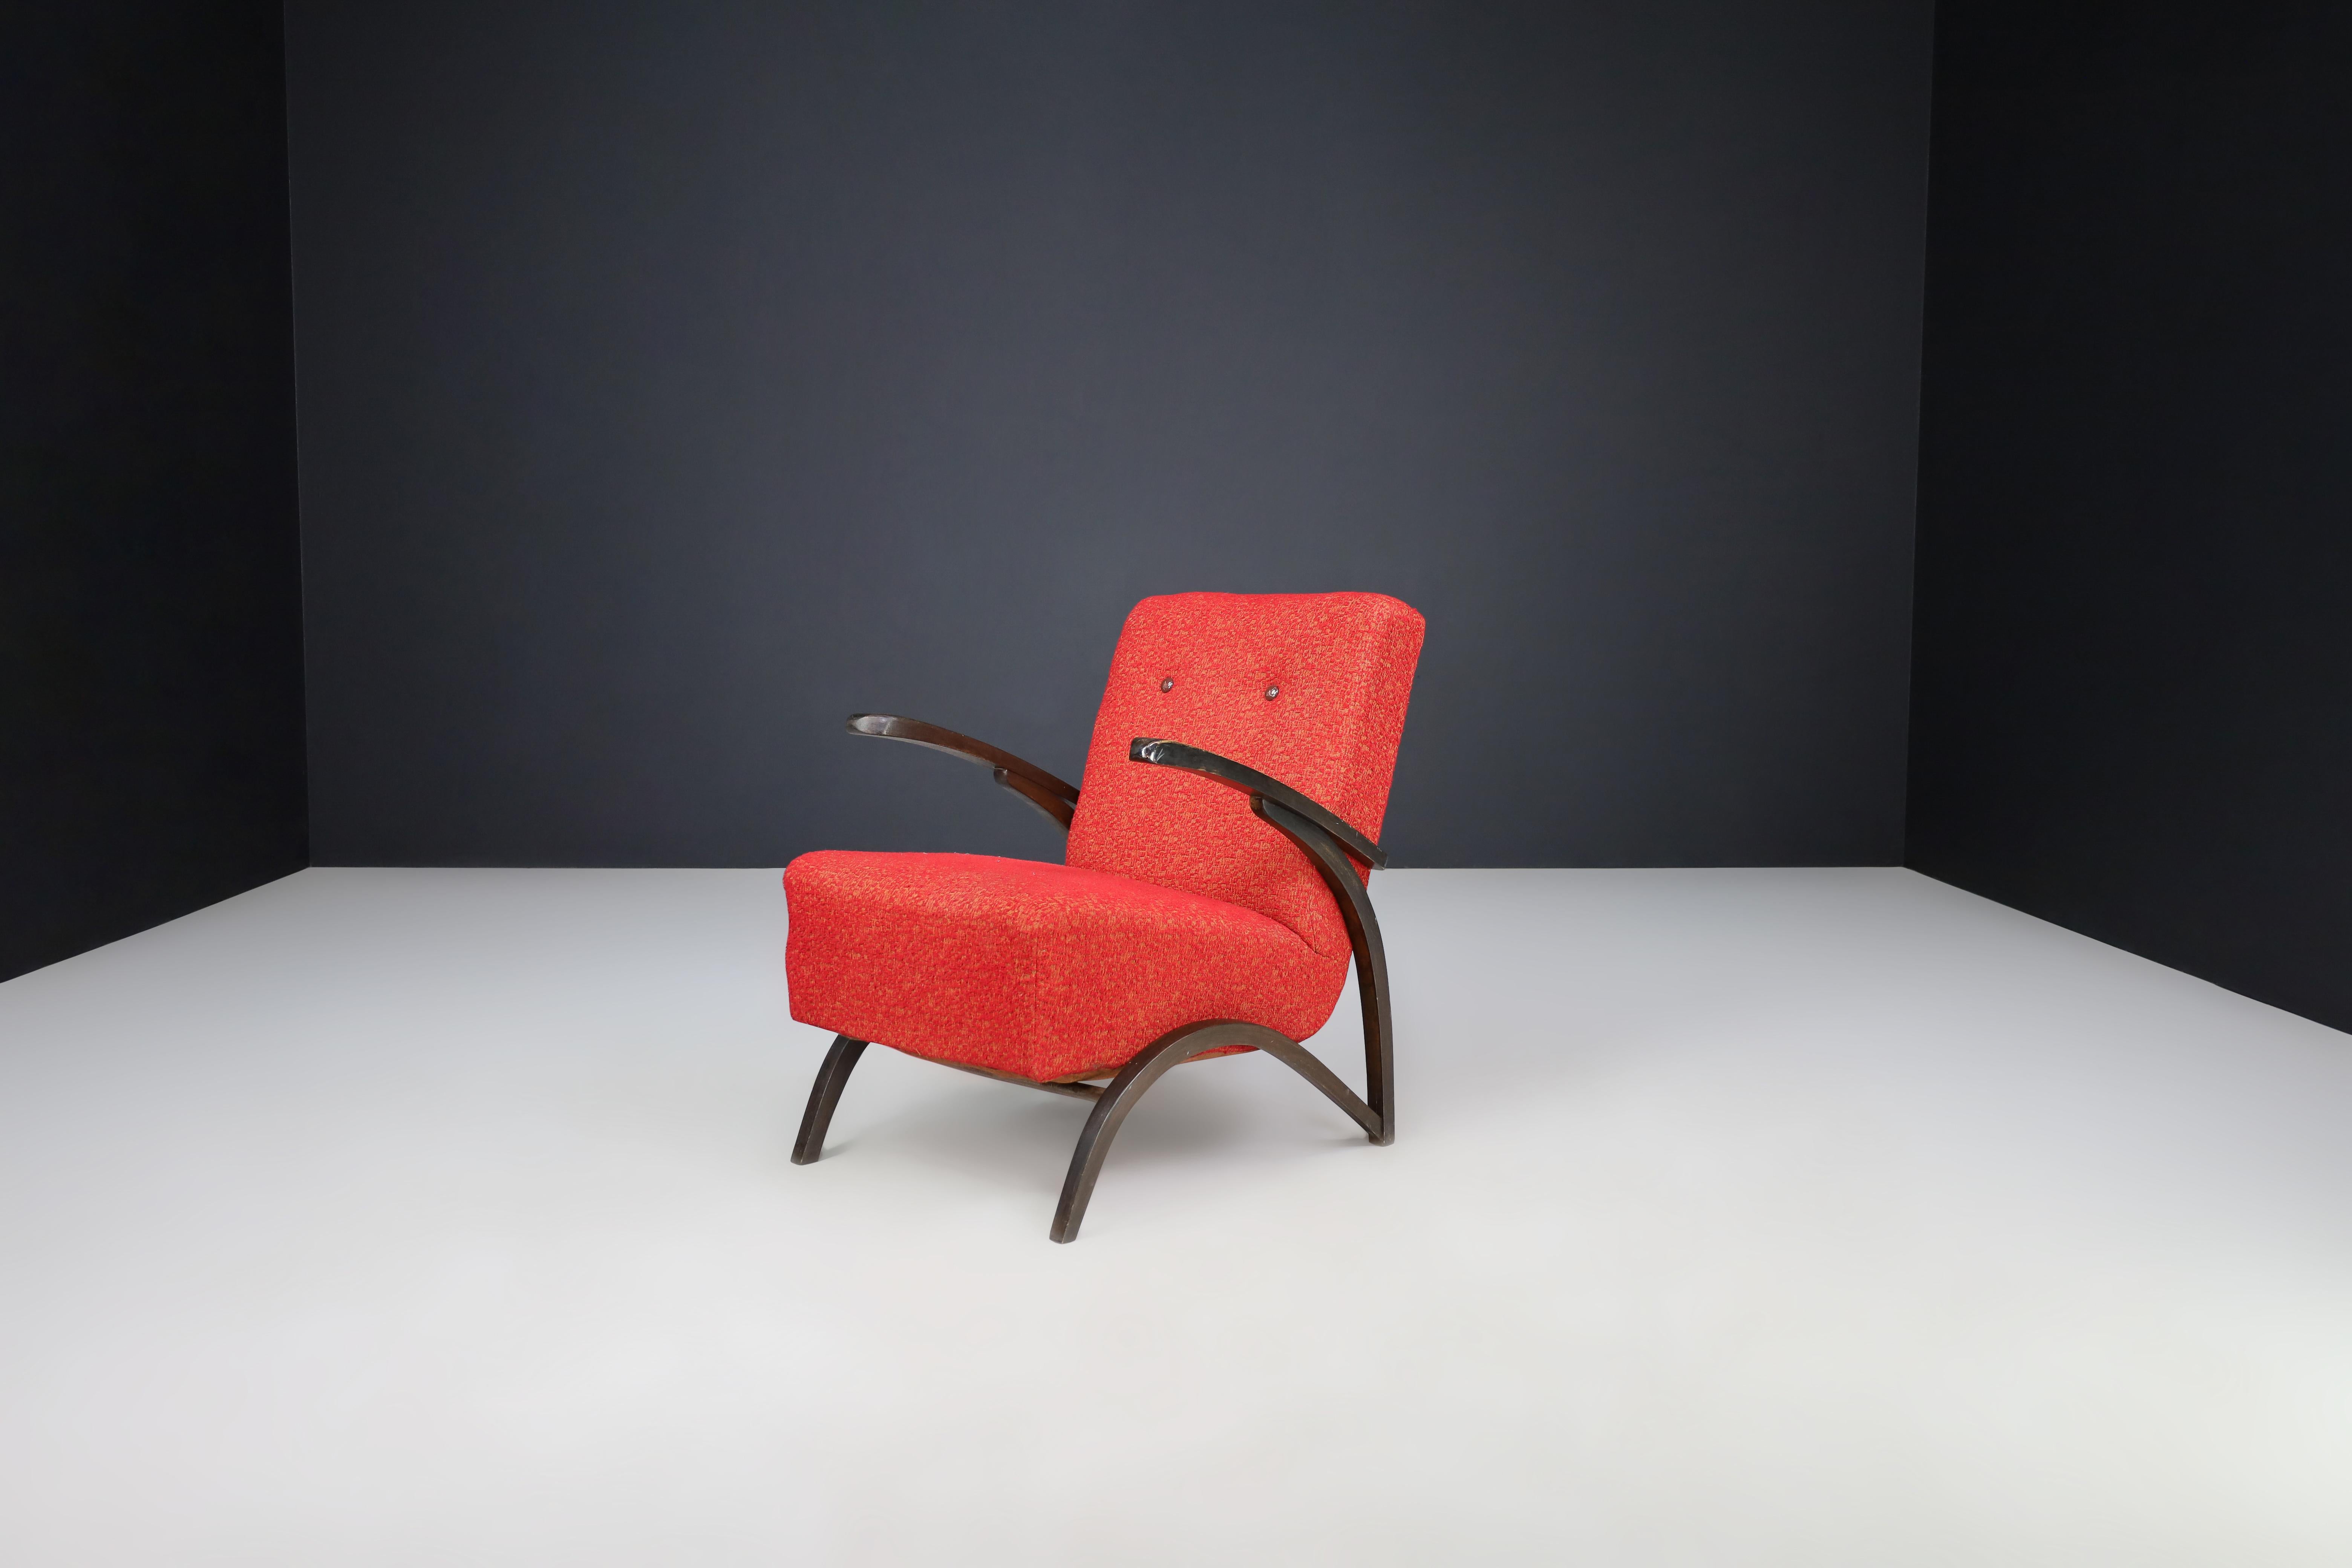 Art Deco Jindrich Halabala Lounge Chair in Original Red Upholstery Czech Republic 1930 For Sale